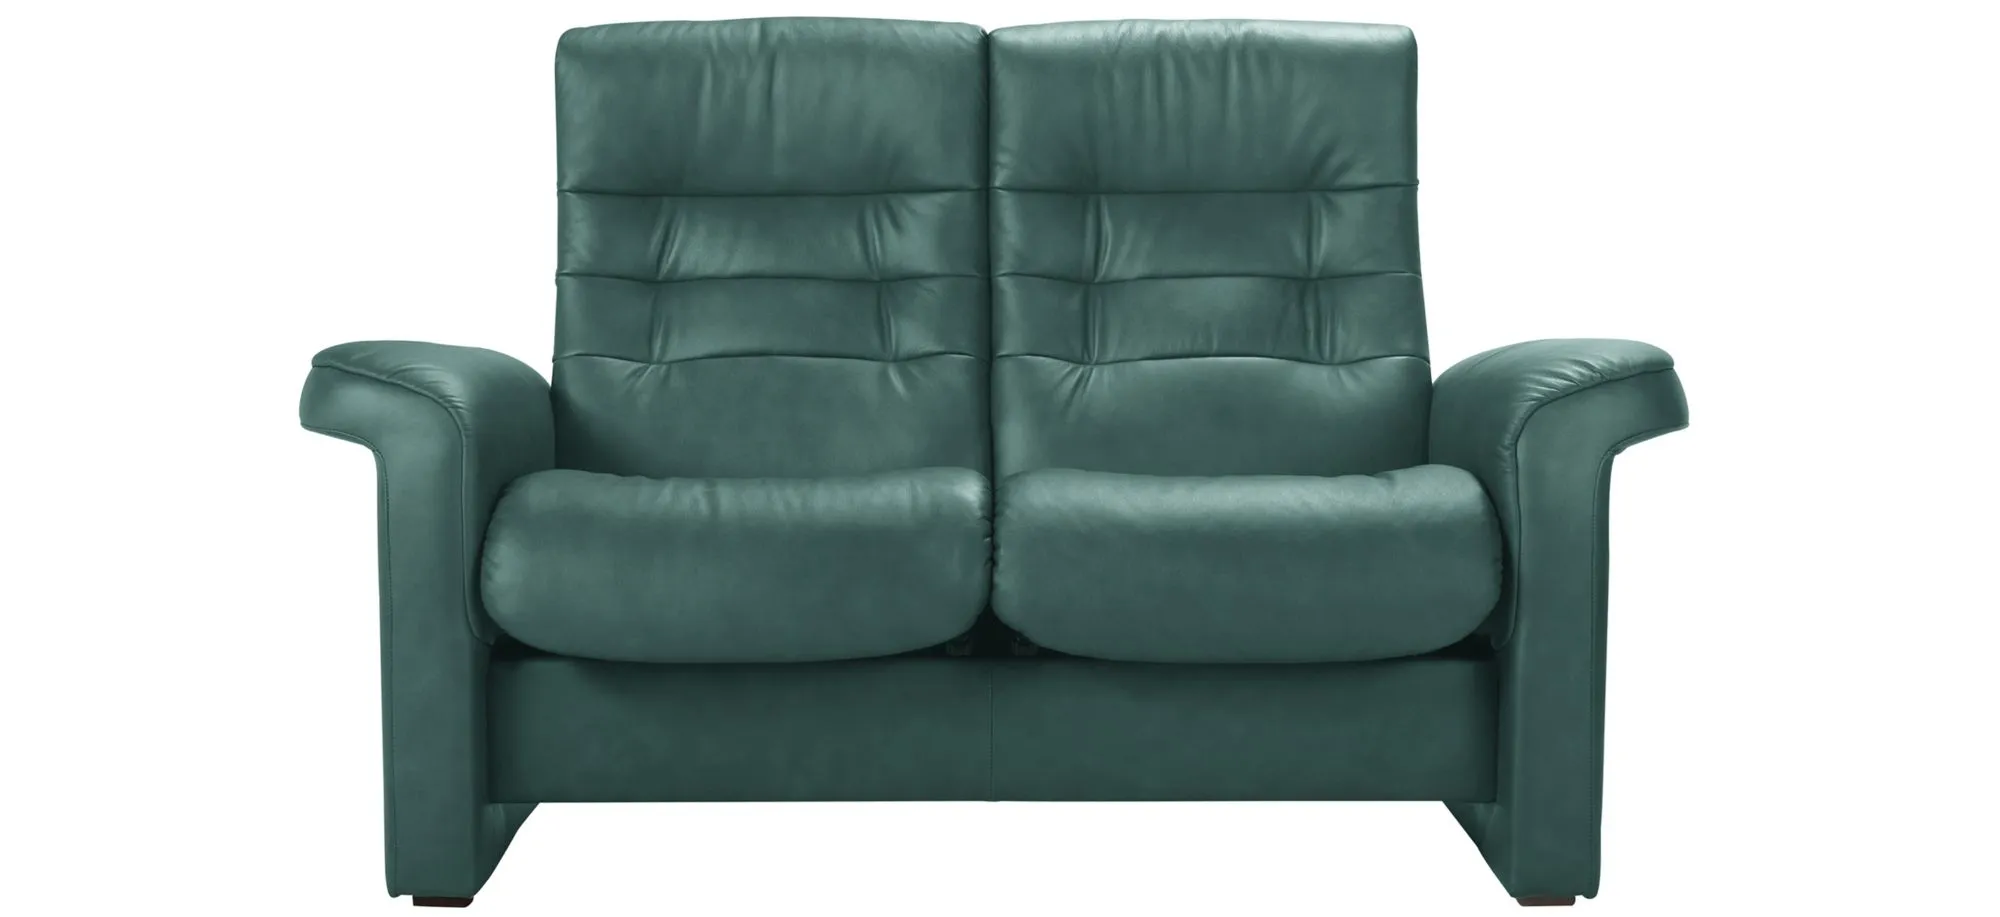 Stressless Sapphire Leather Reclining Loveseat in Paloma Aqua Green by Stressless